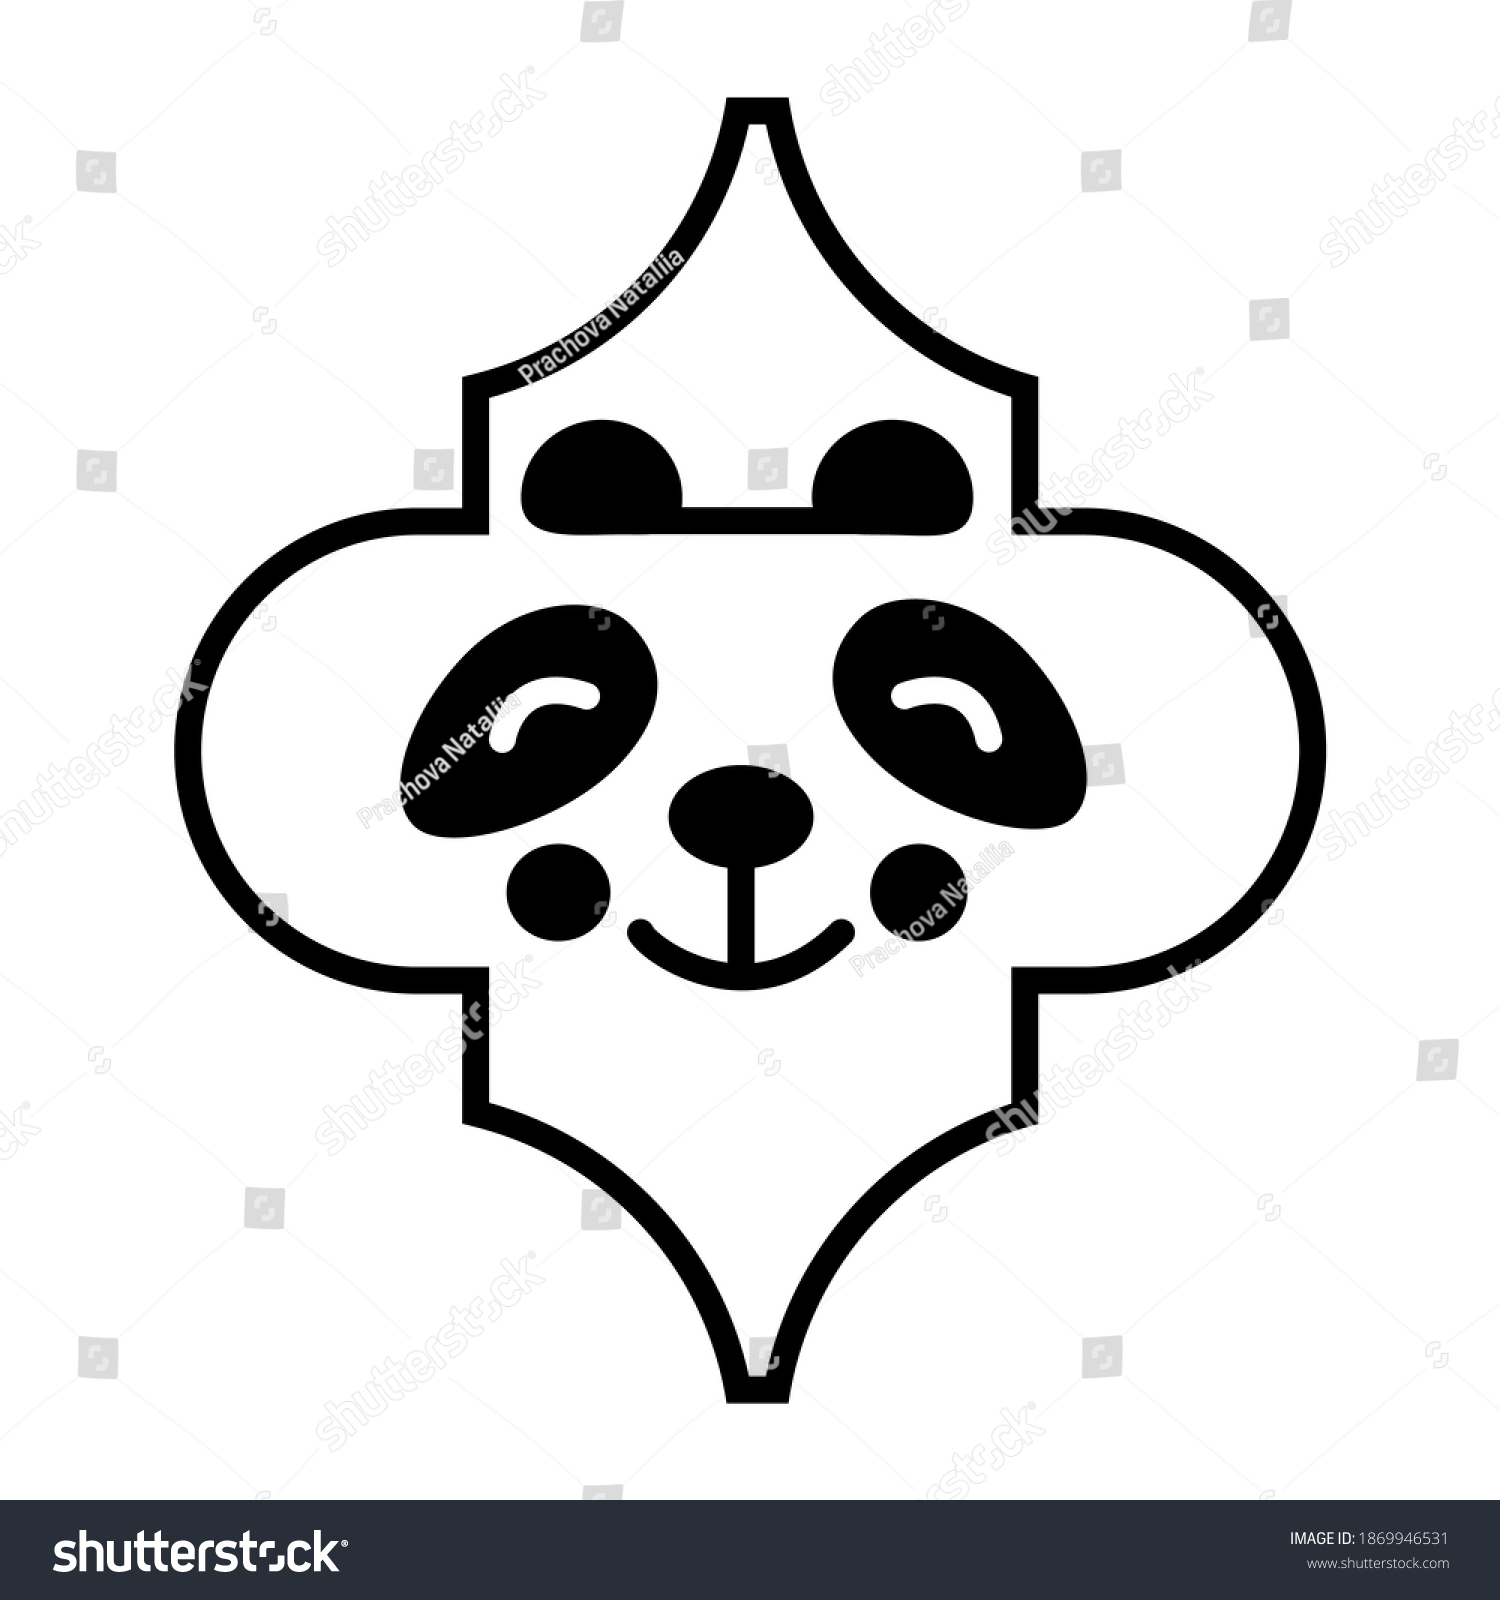 SVG of Christmas Arabesque Tile  Ornament with panda bear isolated on white background. Vector flat illustration. Christmas and New Year design. svg